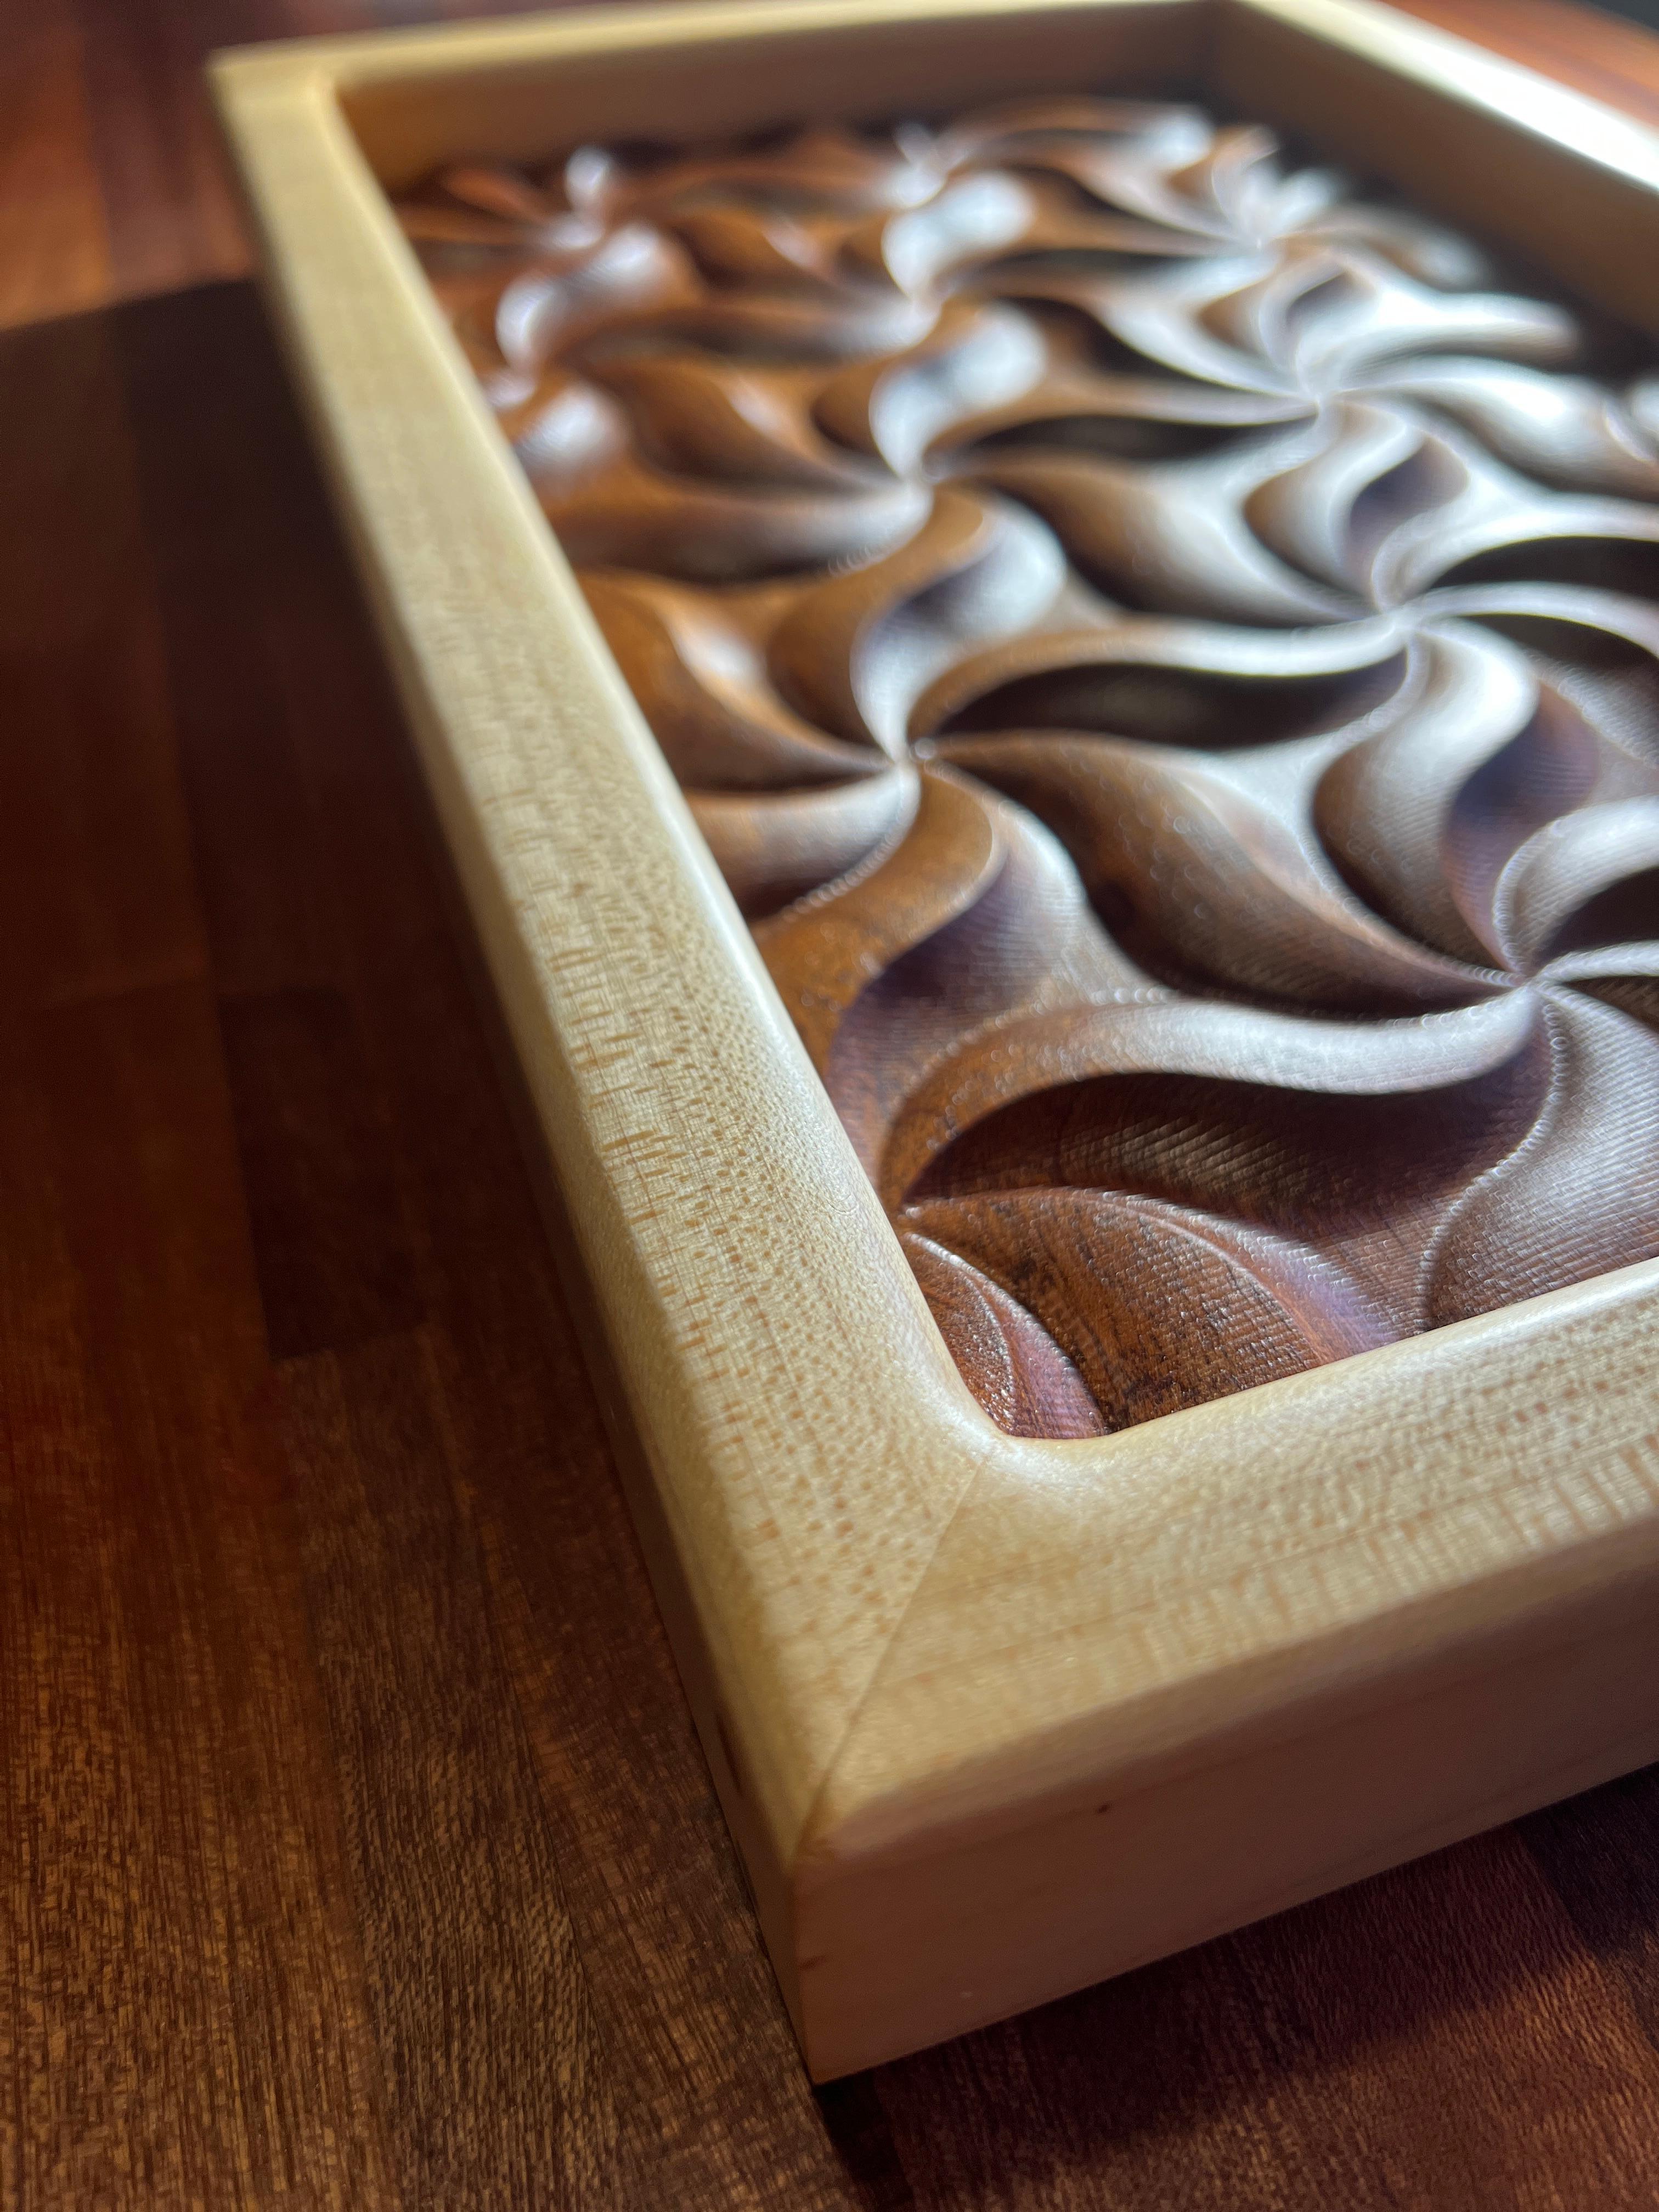 This stylish artisan Vide-Poche was made just for you from solid Sapele wood and clear maple. This piece was designed and created with extreme valleys and peaks to capture morning, afternoon and evening light. The lighting casts shadows and patterns